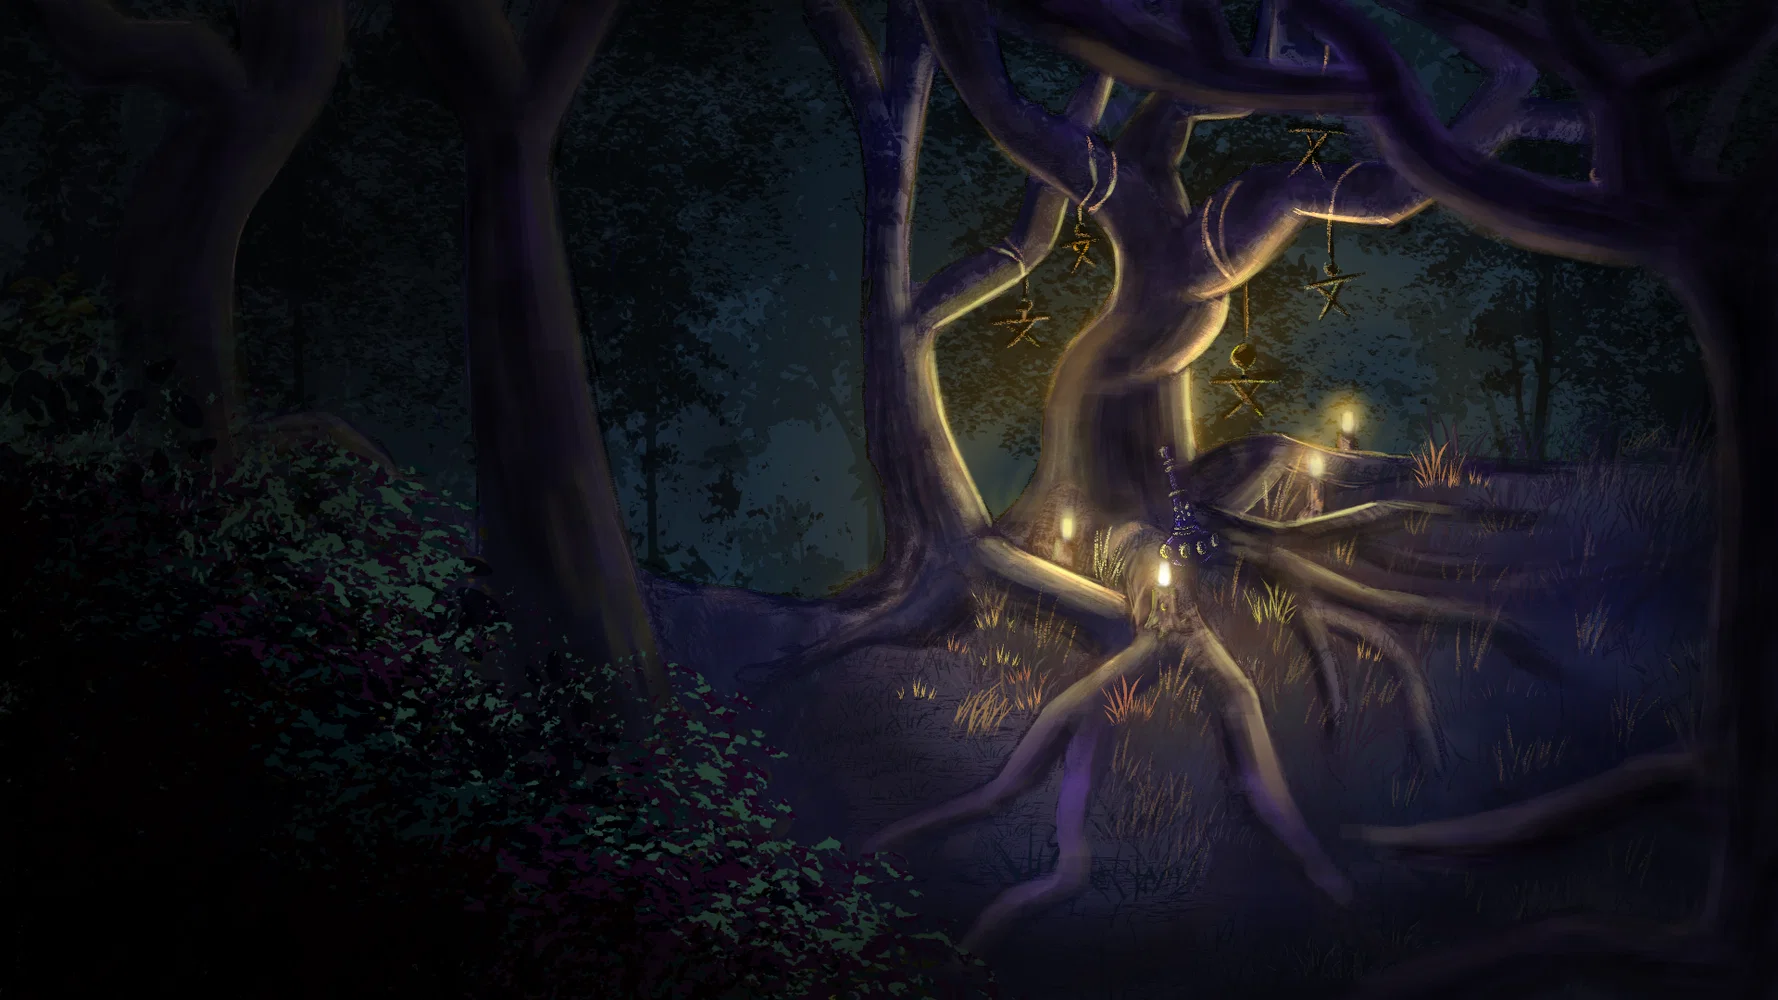 background concept of a forest wtih a sinister twist